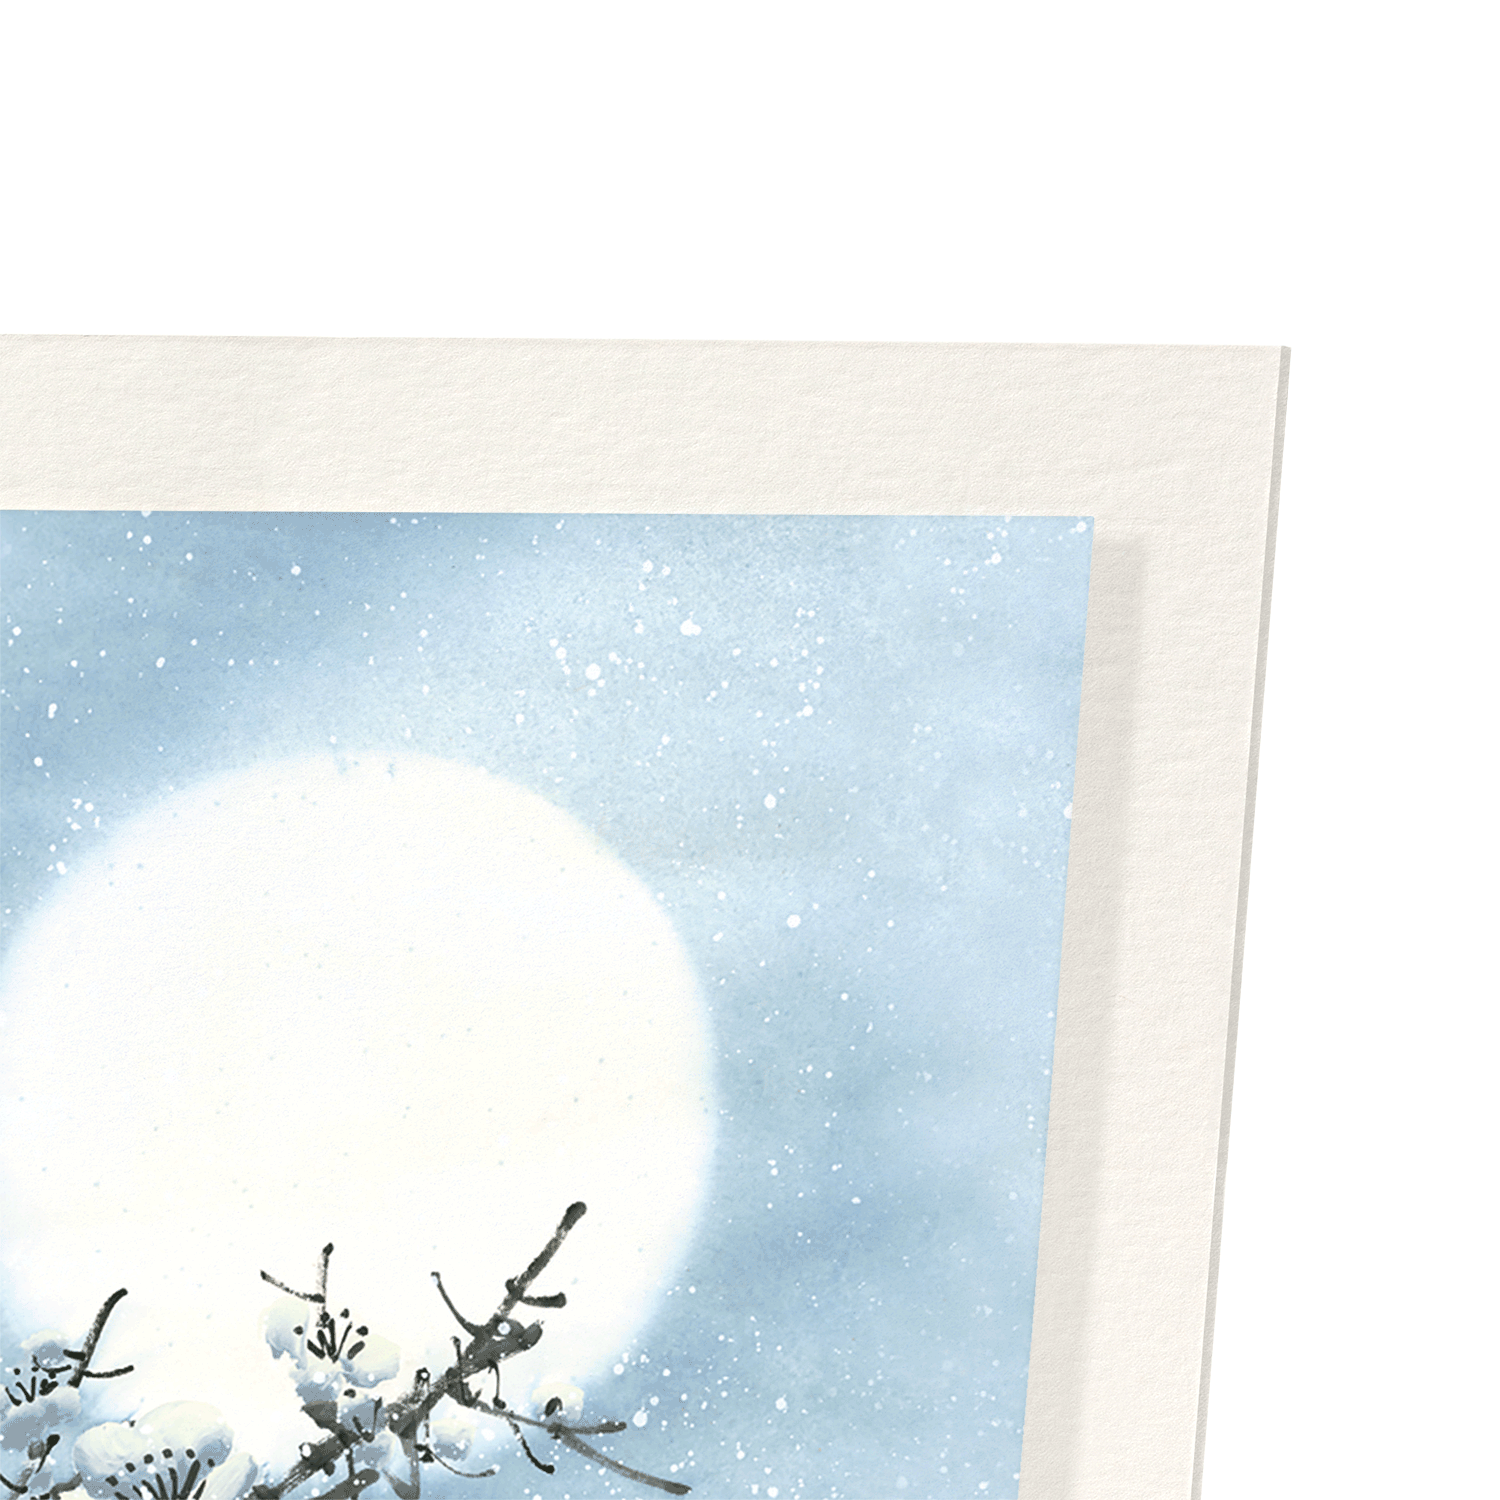 PLUM BLOSSOM IN BLUE MOON